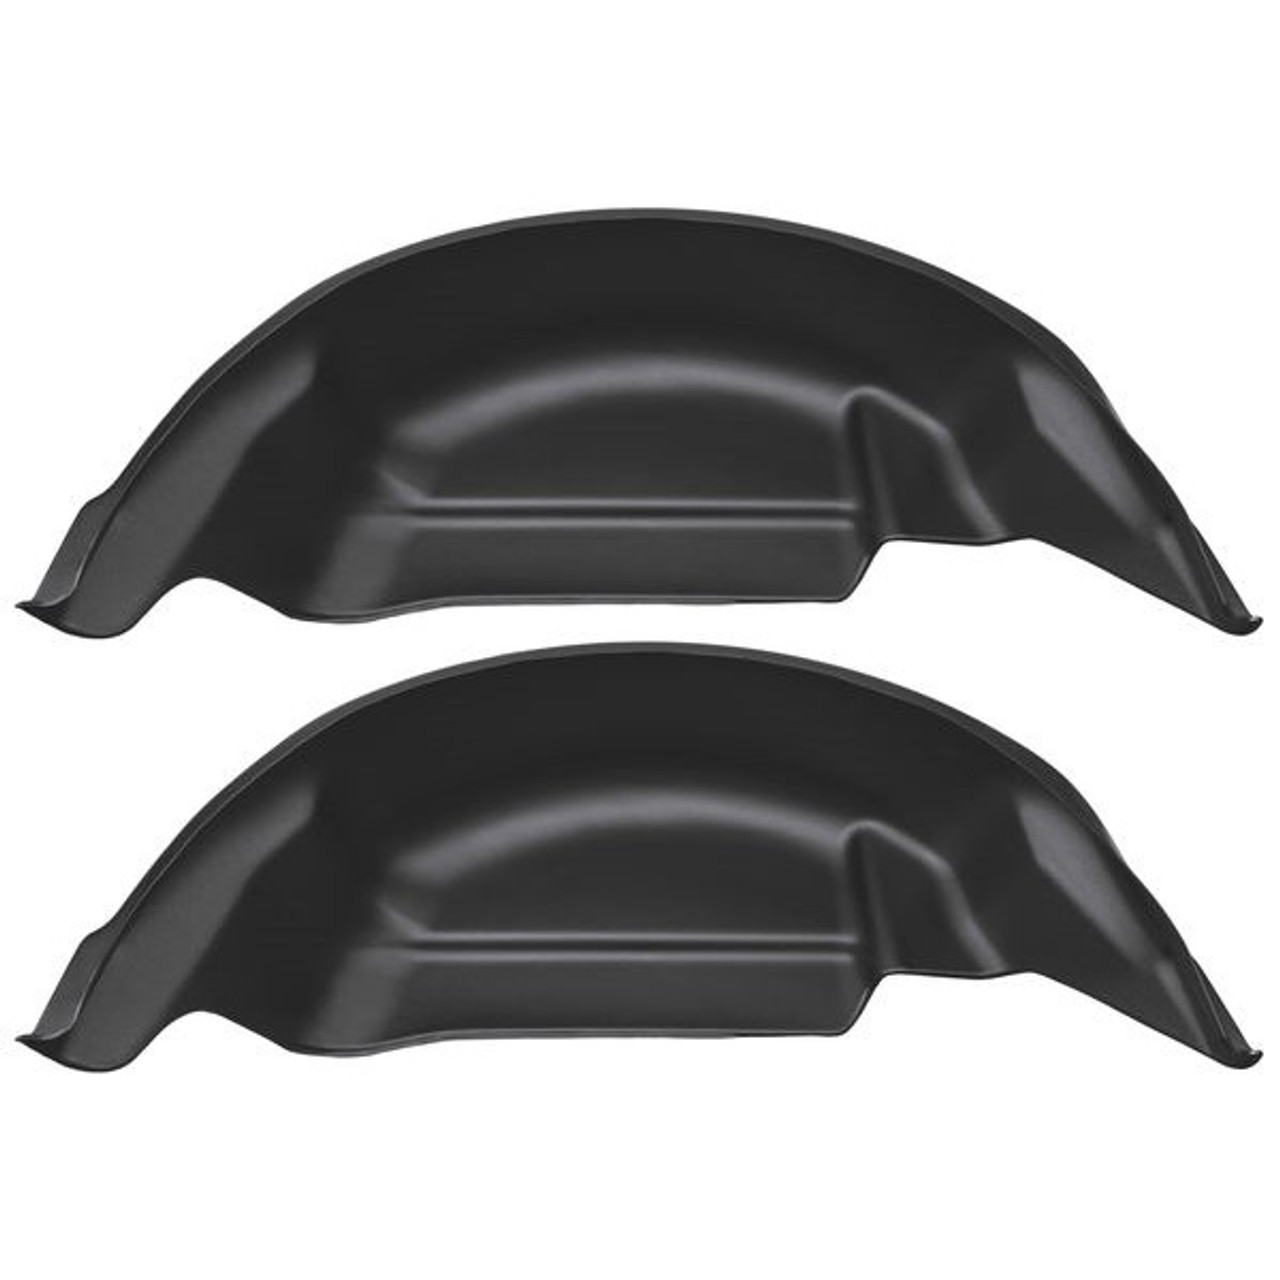 Husky Liners 2015 Ford F-150 Black Rear Wheel Well Guards (PN: 79121)